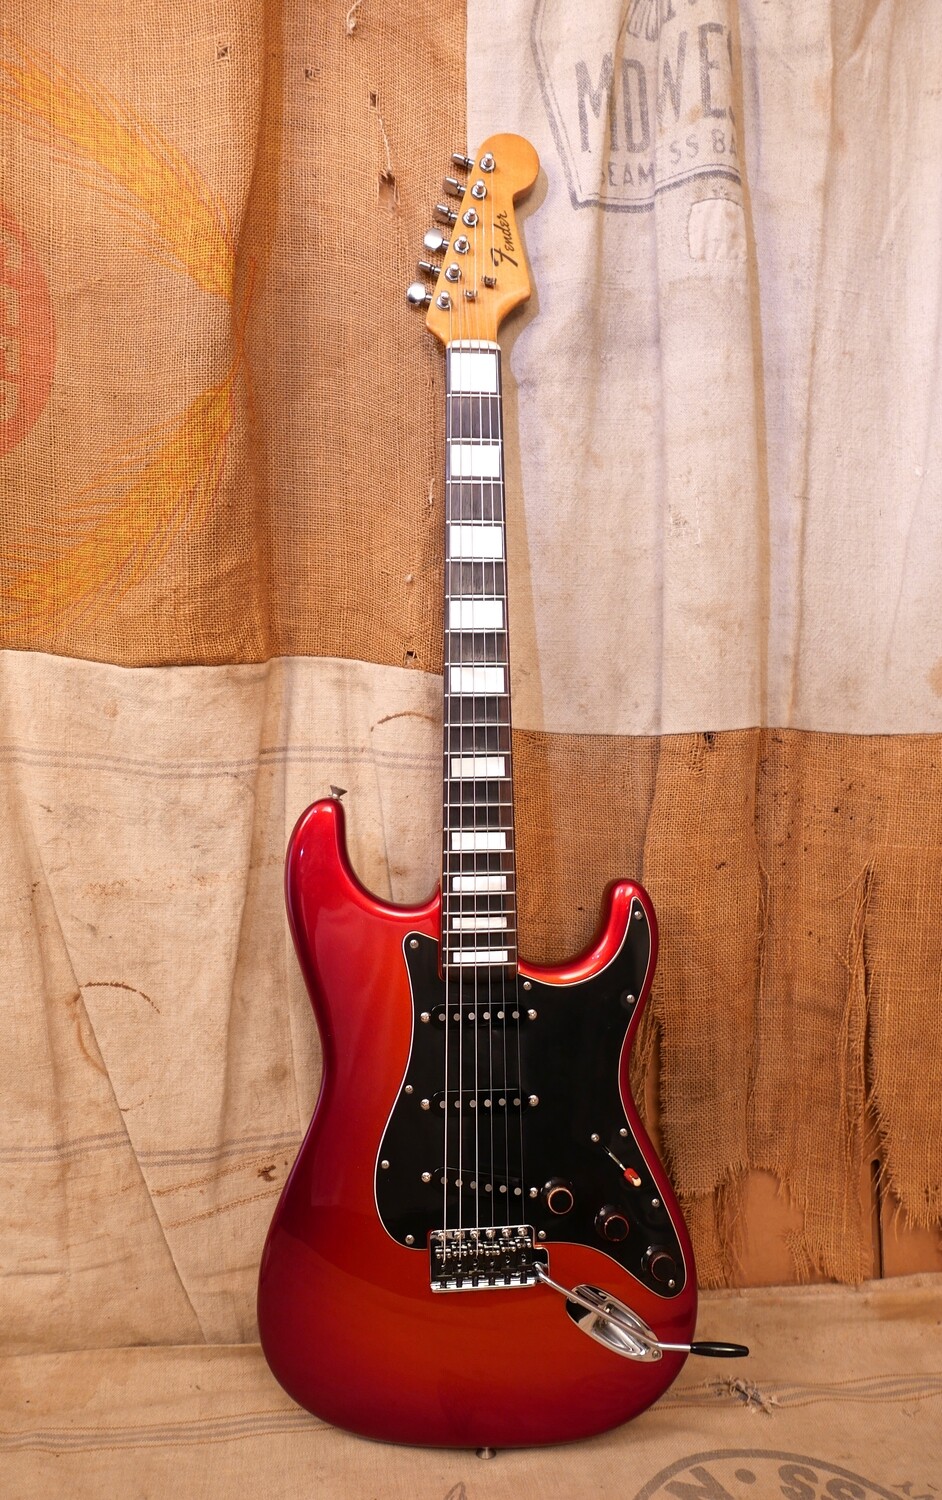 1963 Fender Stratocaster Red Refin modified with block inlays